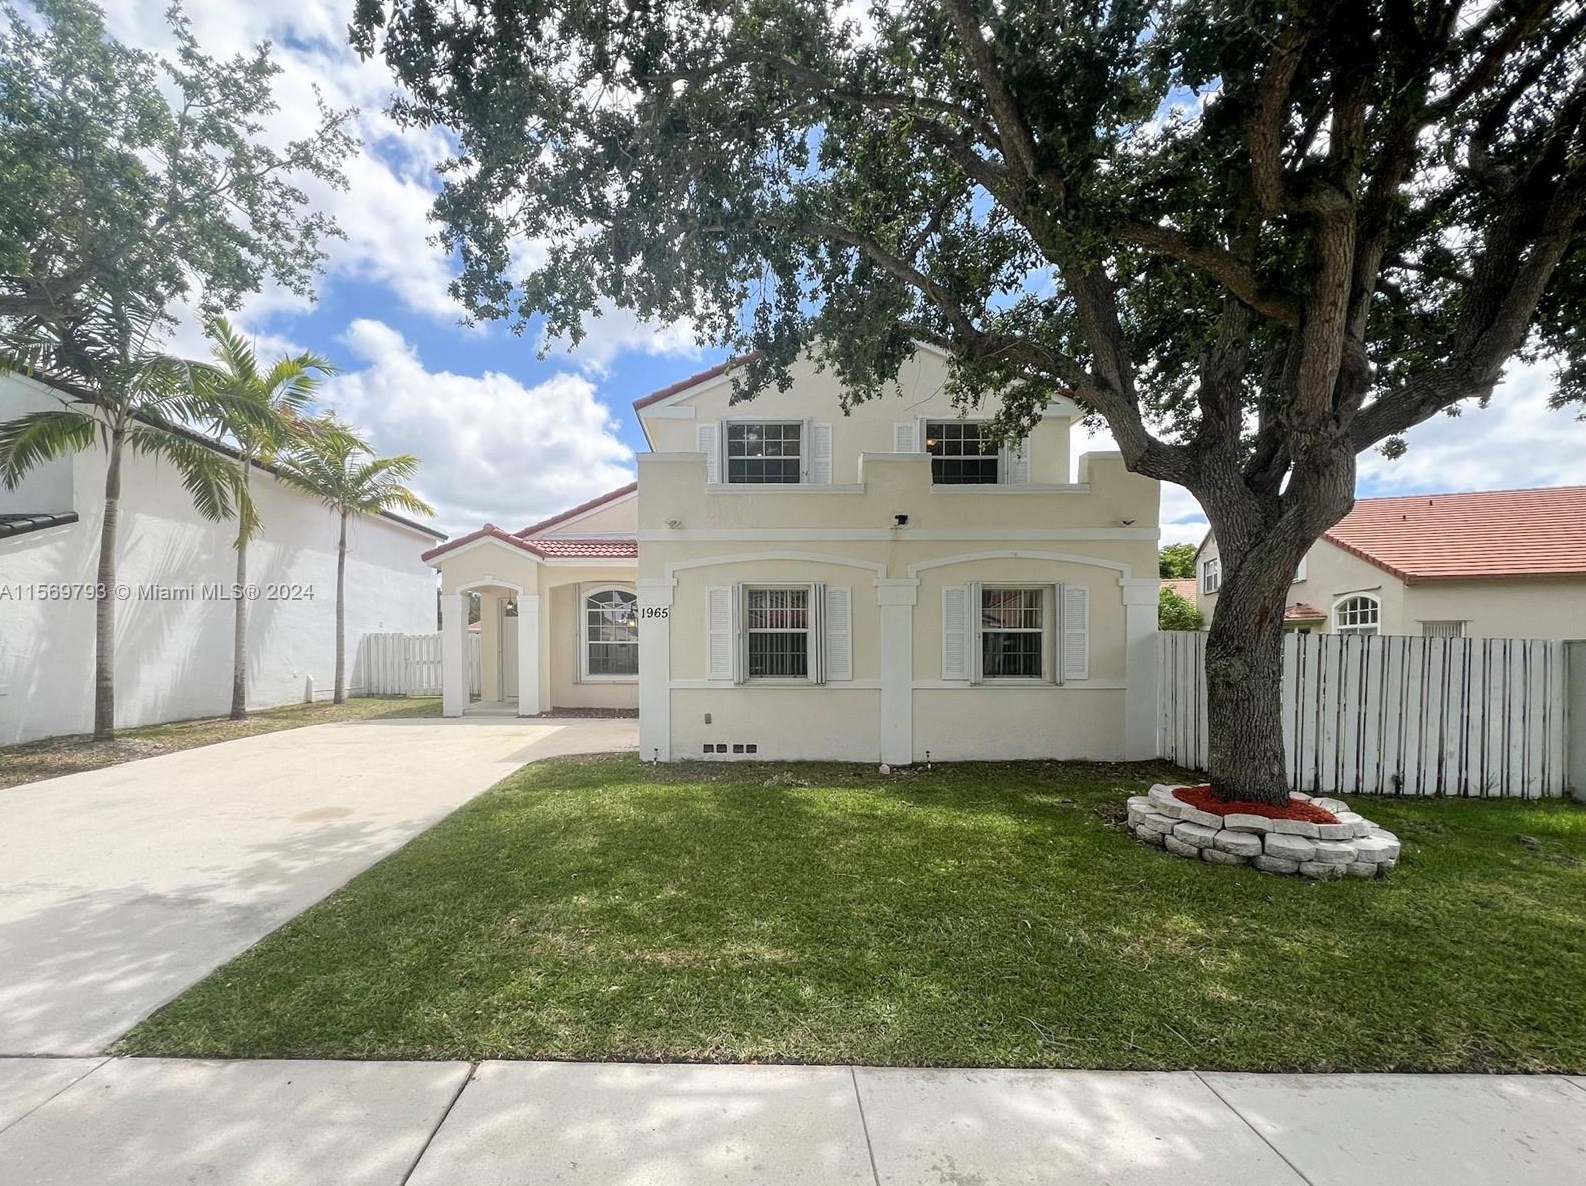 1965 Nw 181st Terrace, Hollywood, FL 33029